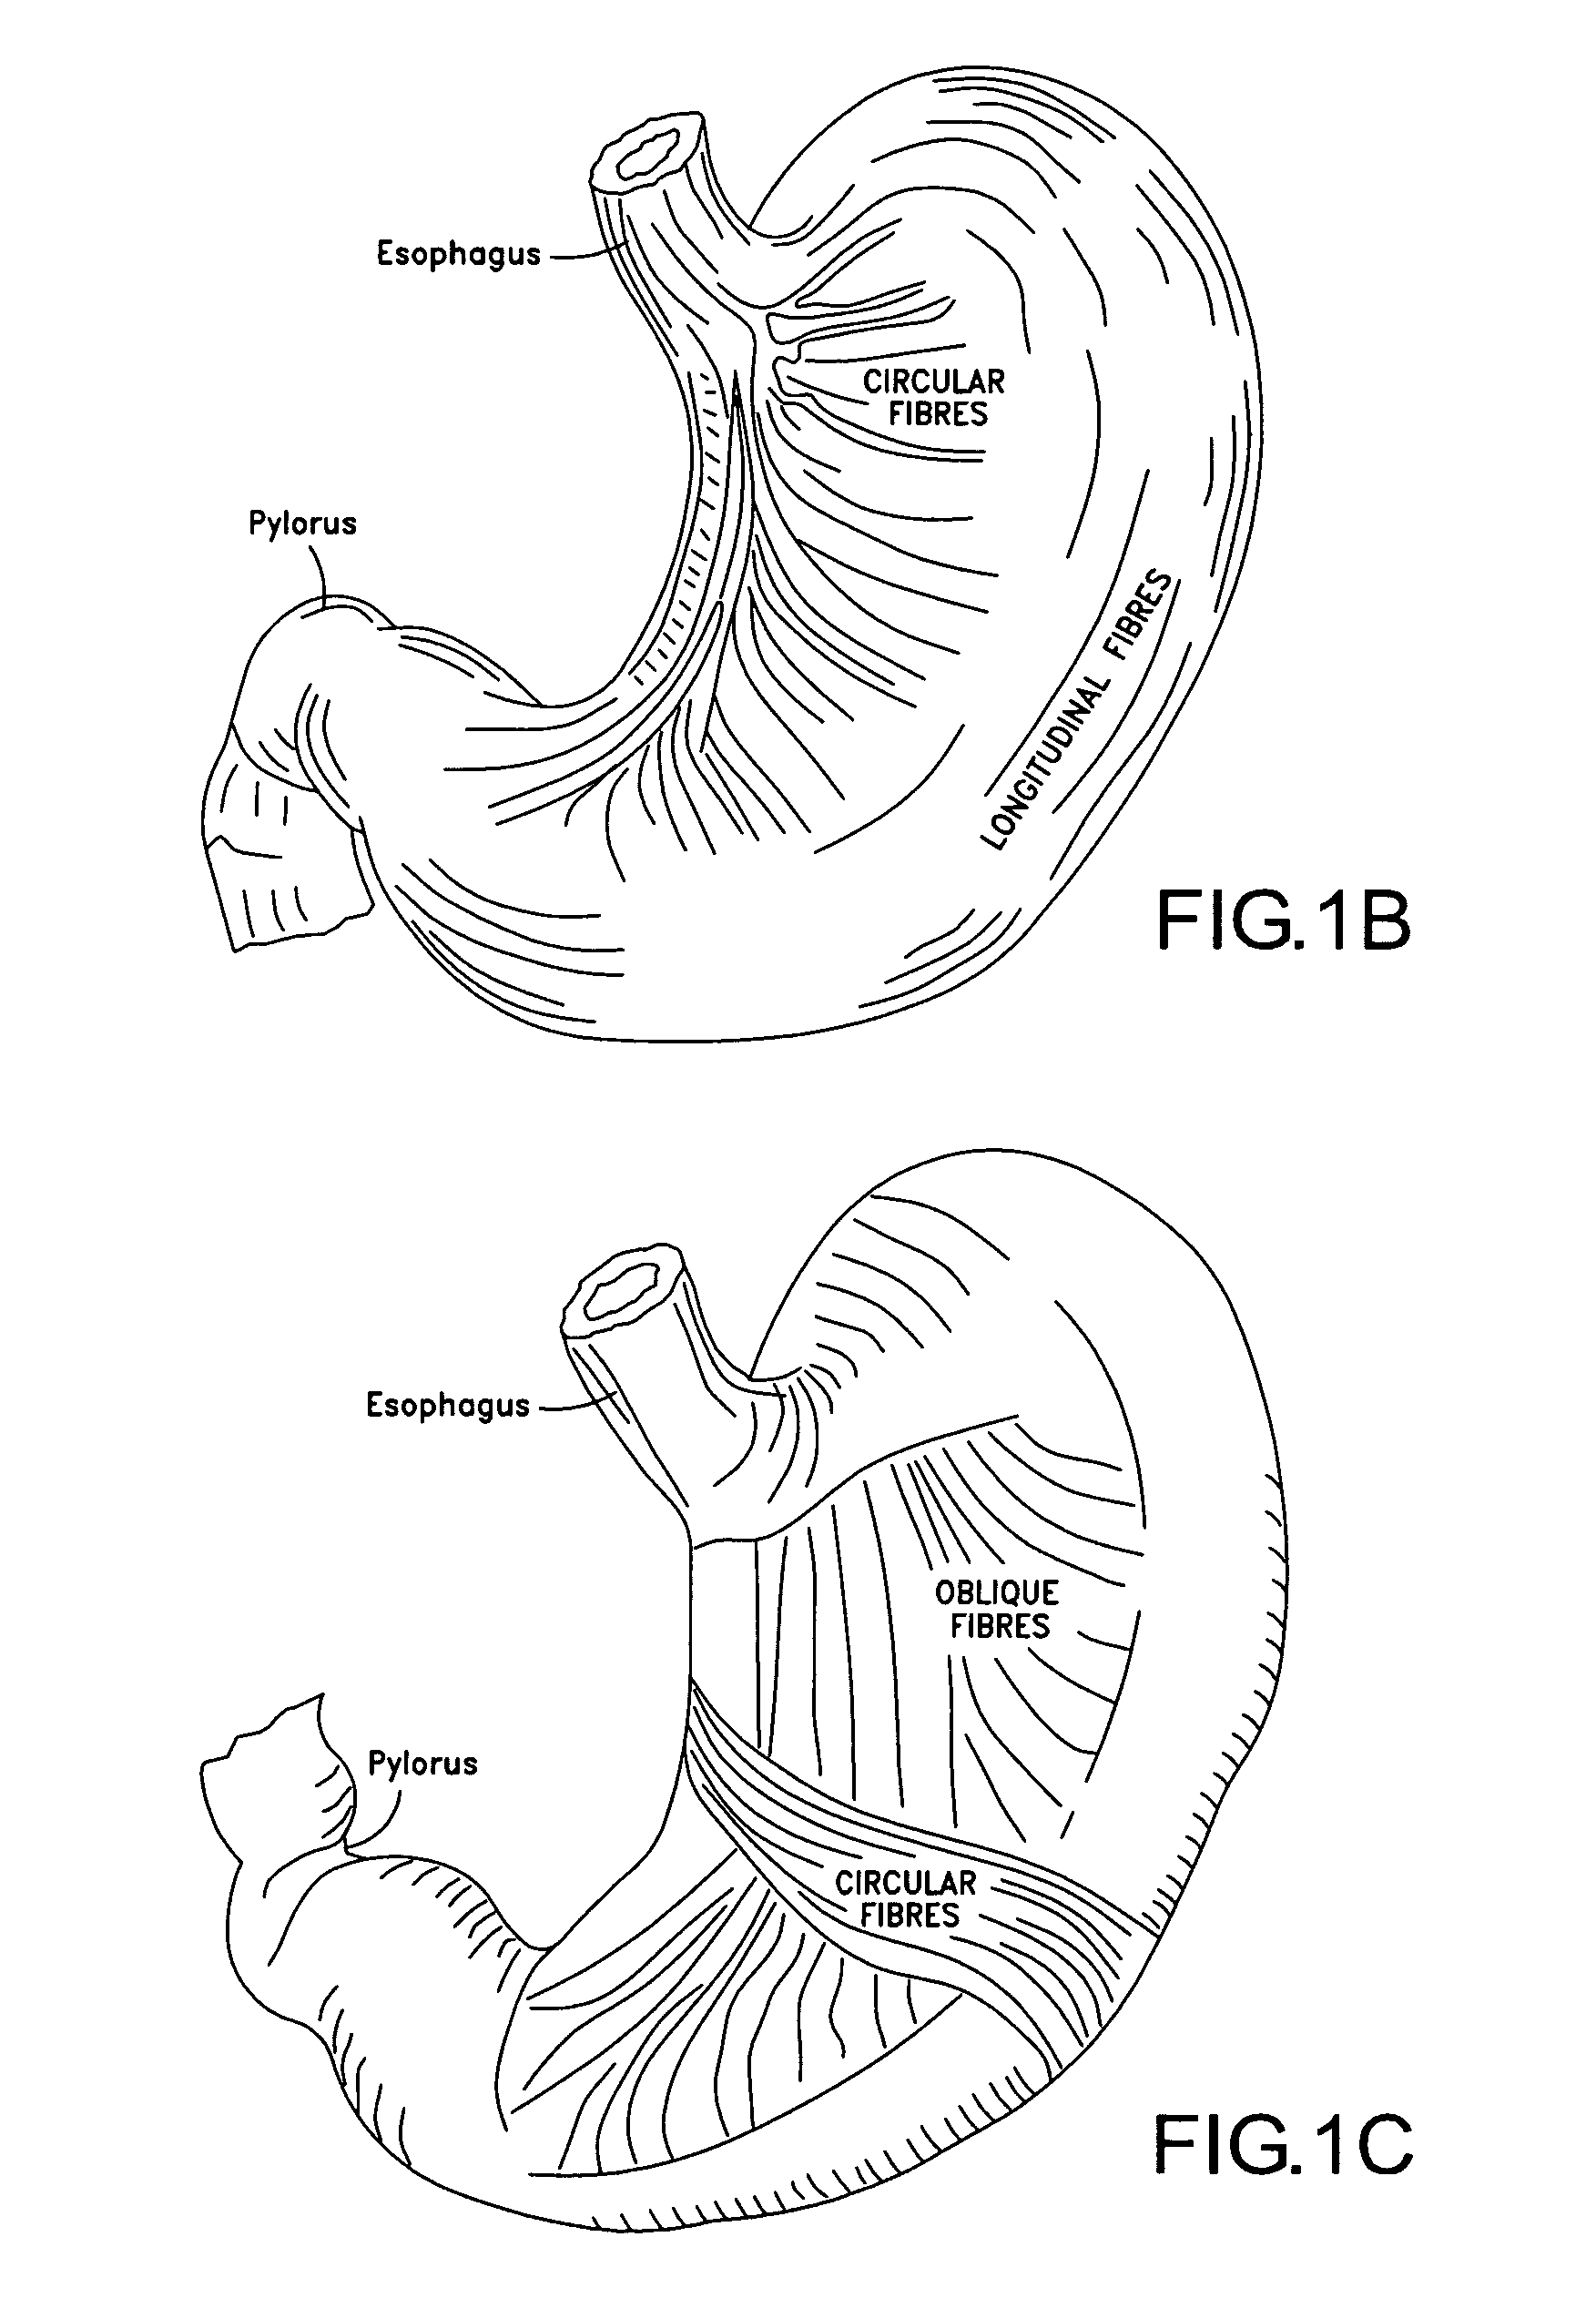 Apparatus and method for treating obesity using neurotoxins in conjunction with bariatric procedures